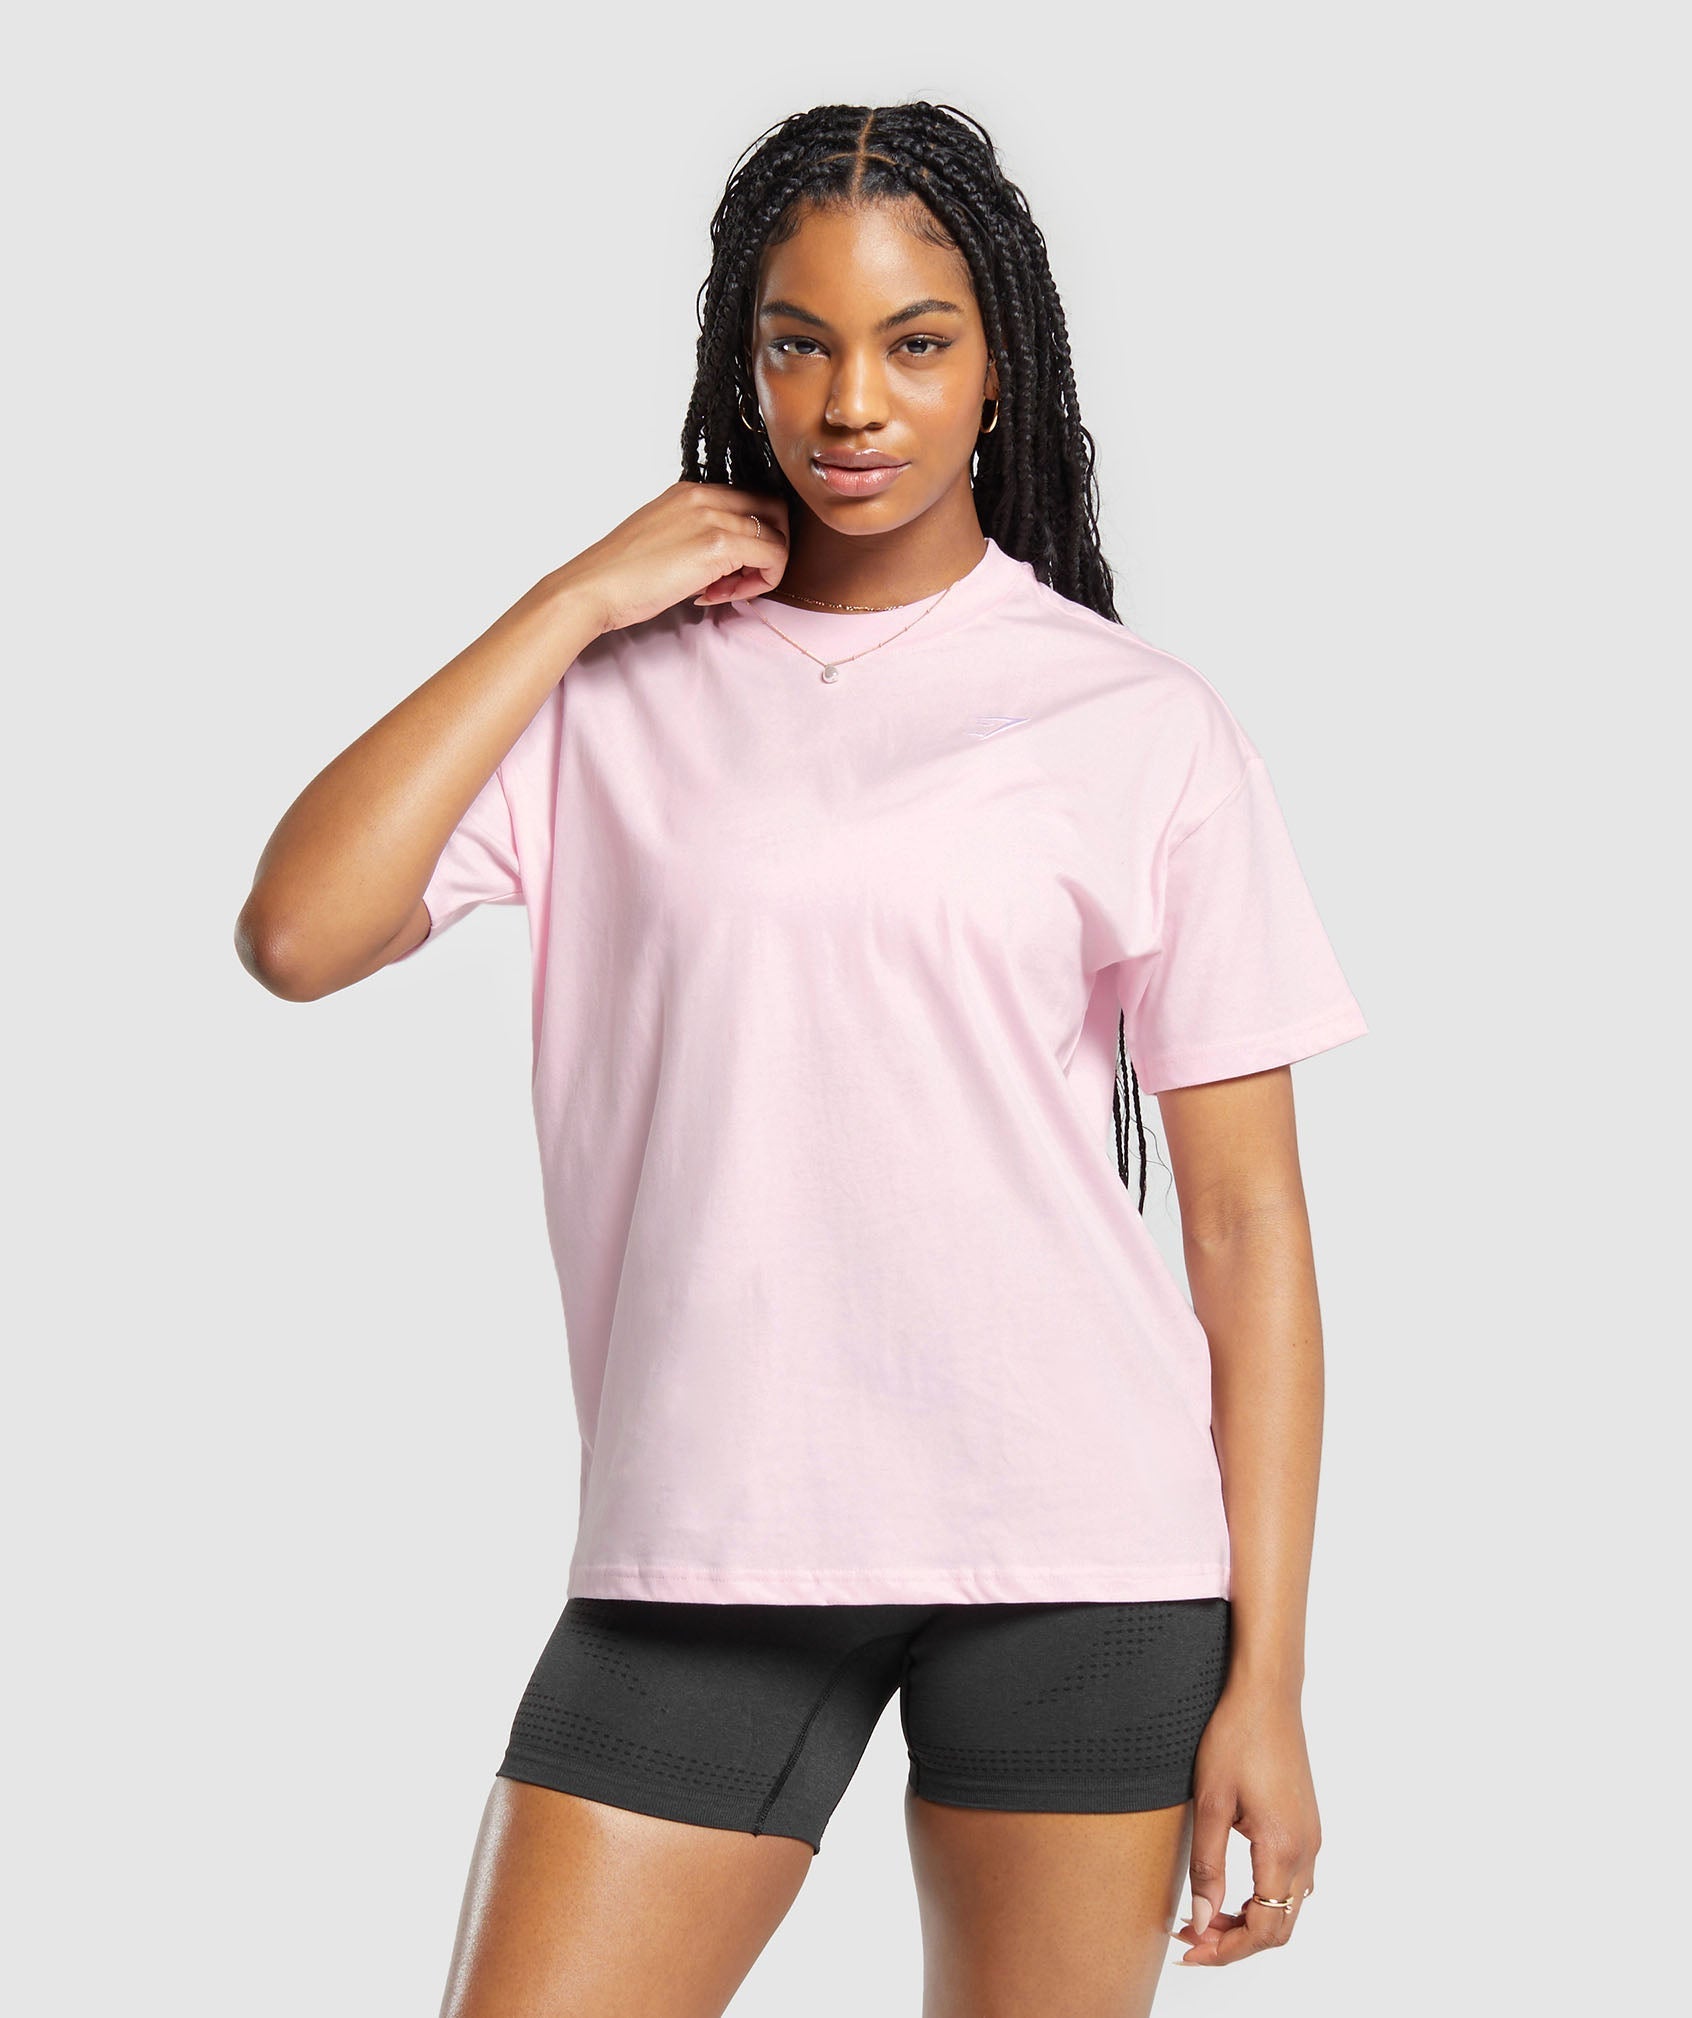 Training Oversized T-Shirt in Dolly Pink is out of stock